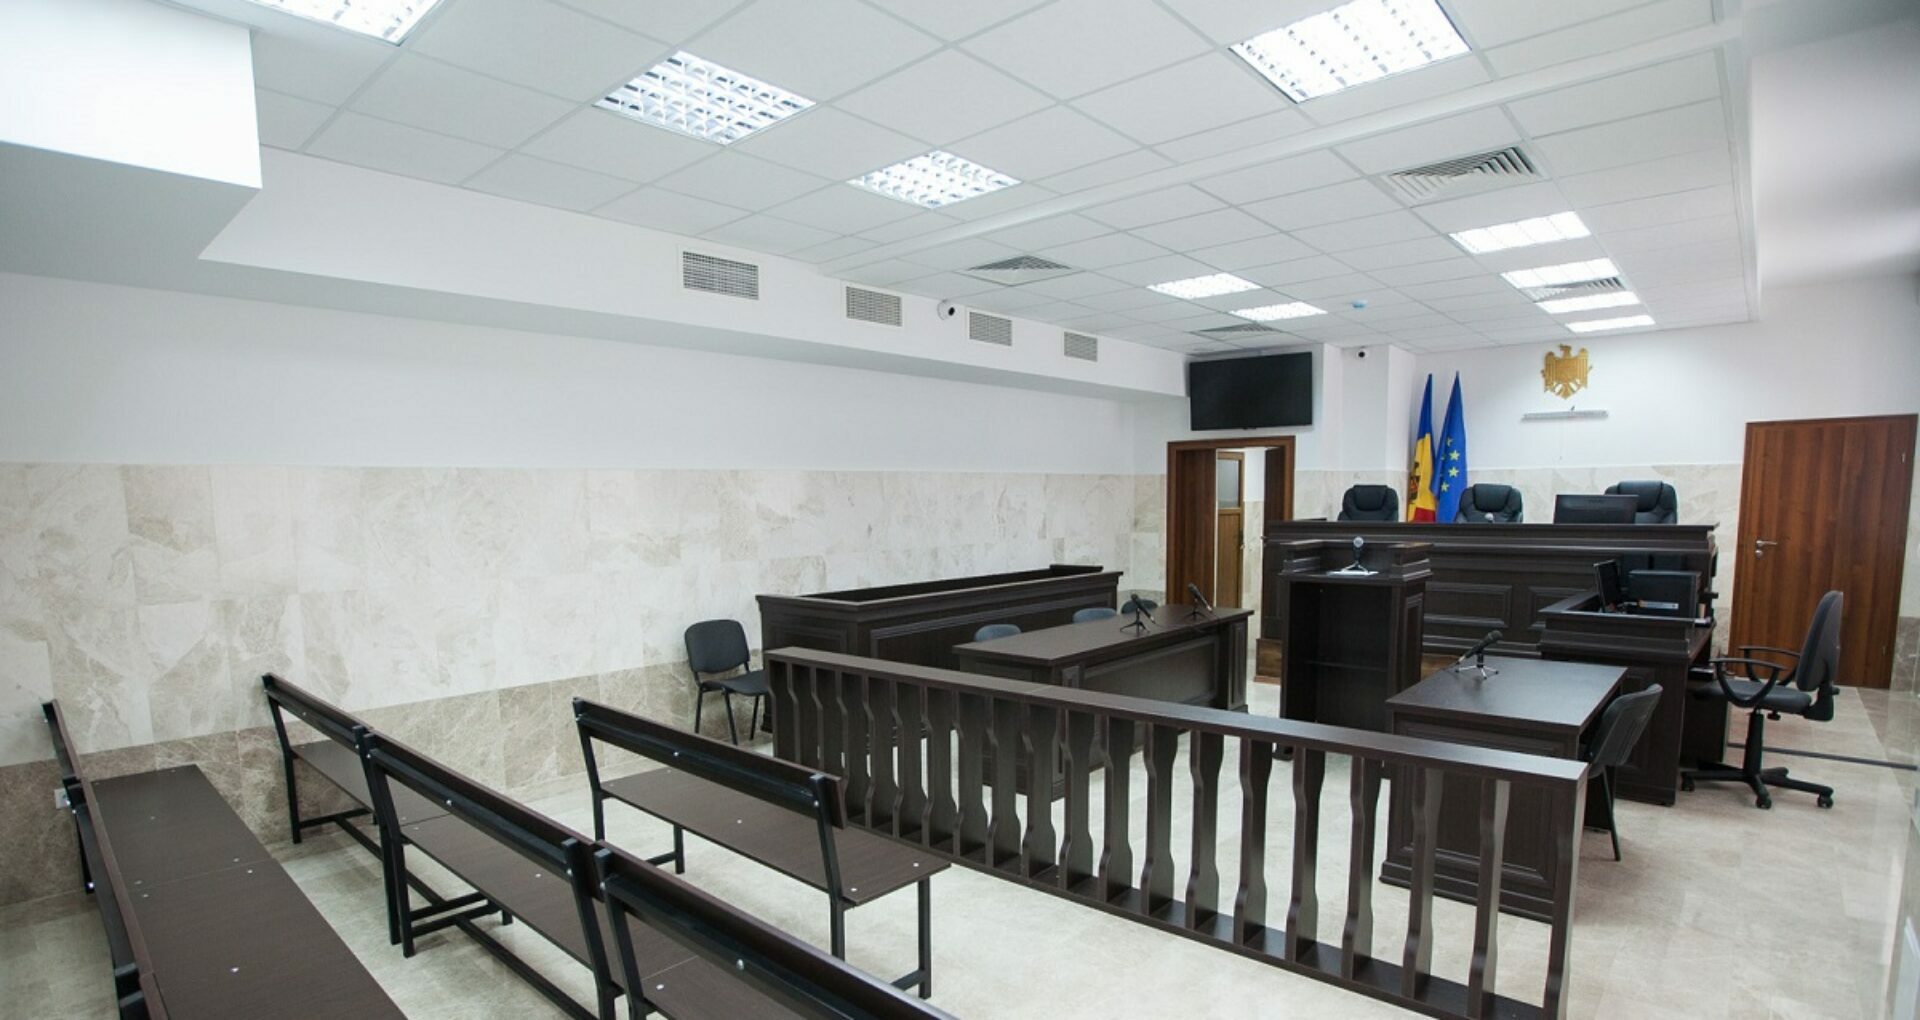 The Salaries and Purchases Made by the Presidents of Moldova’s Courts